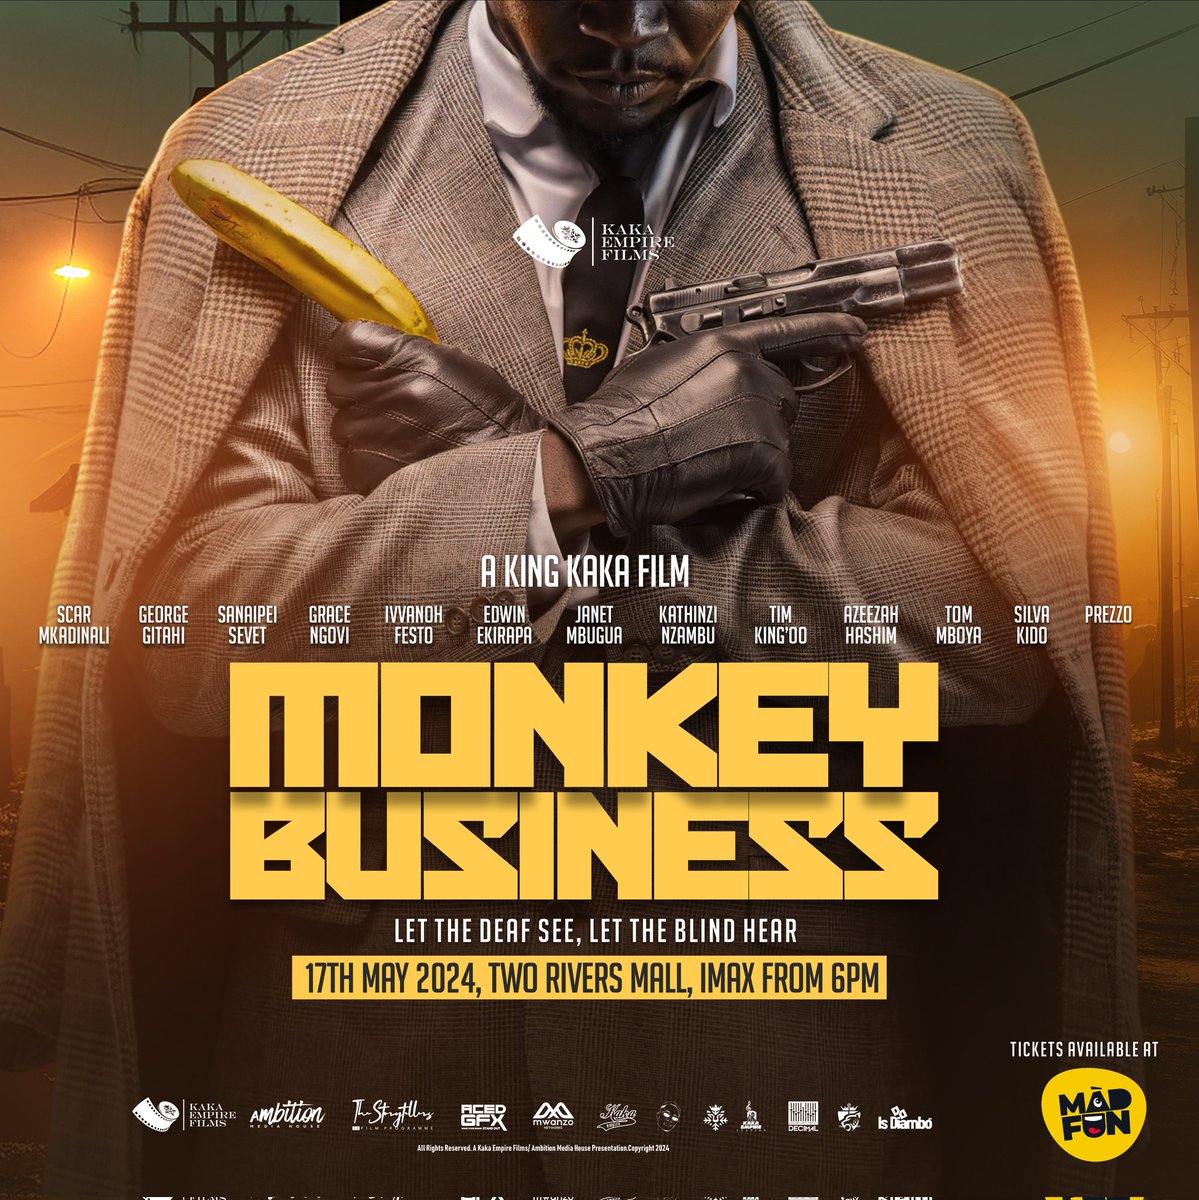 Grab your tickets now at madfun.com/event/monkeybu… and enjoy the show on May 17th at Two Rivers Mall, Imax, with a complimentary beverage in hand. The hype for Monkey Business is through the roof as we gear up for the best local series yet! 🍌 🍌 #kakaempireisthelifestyle